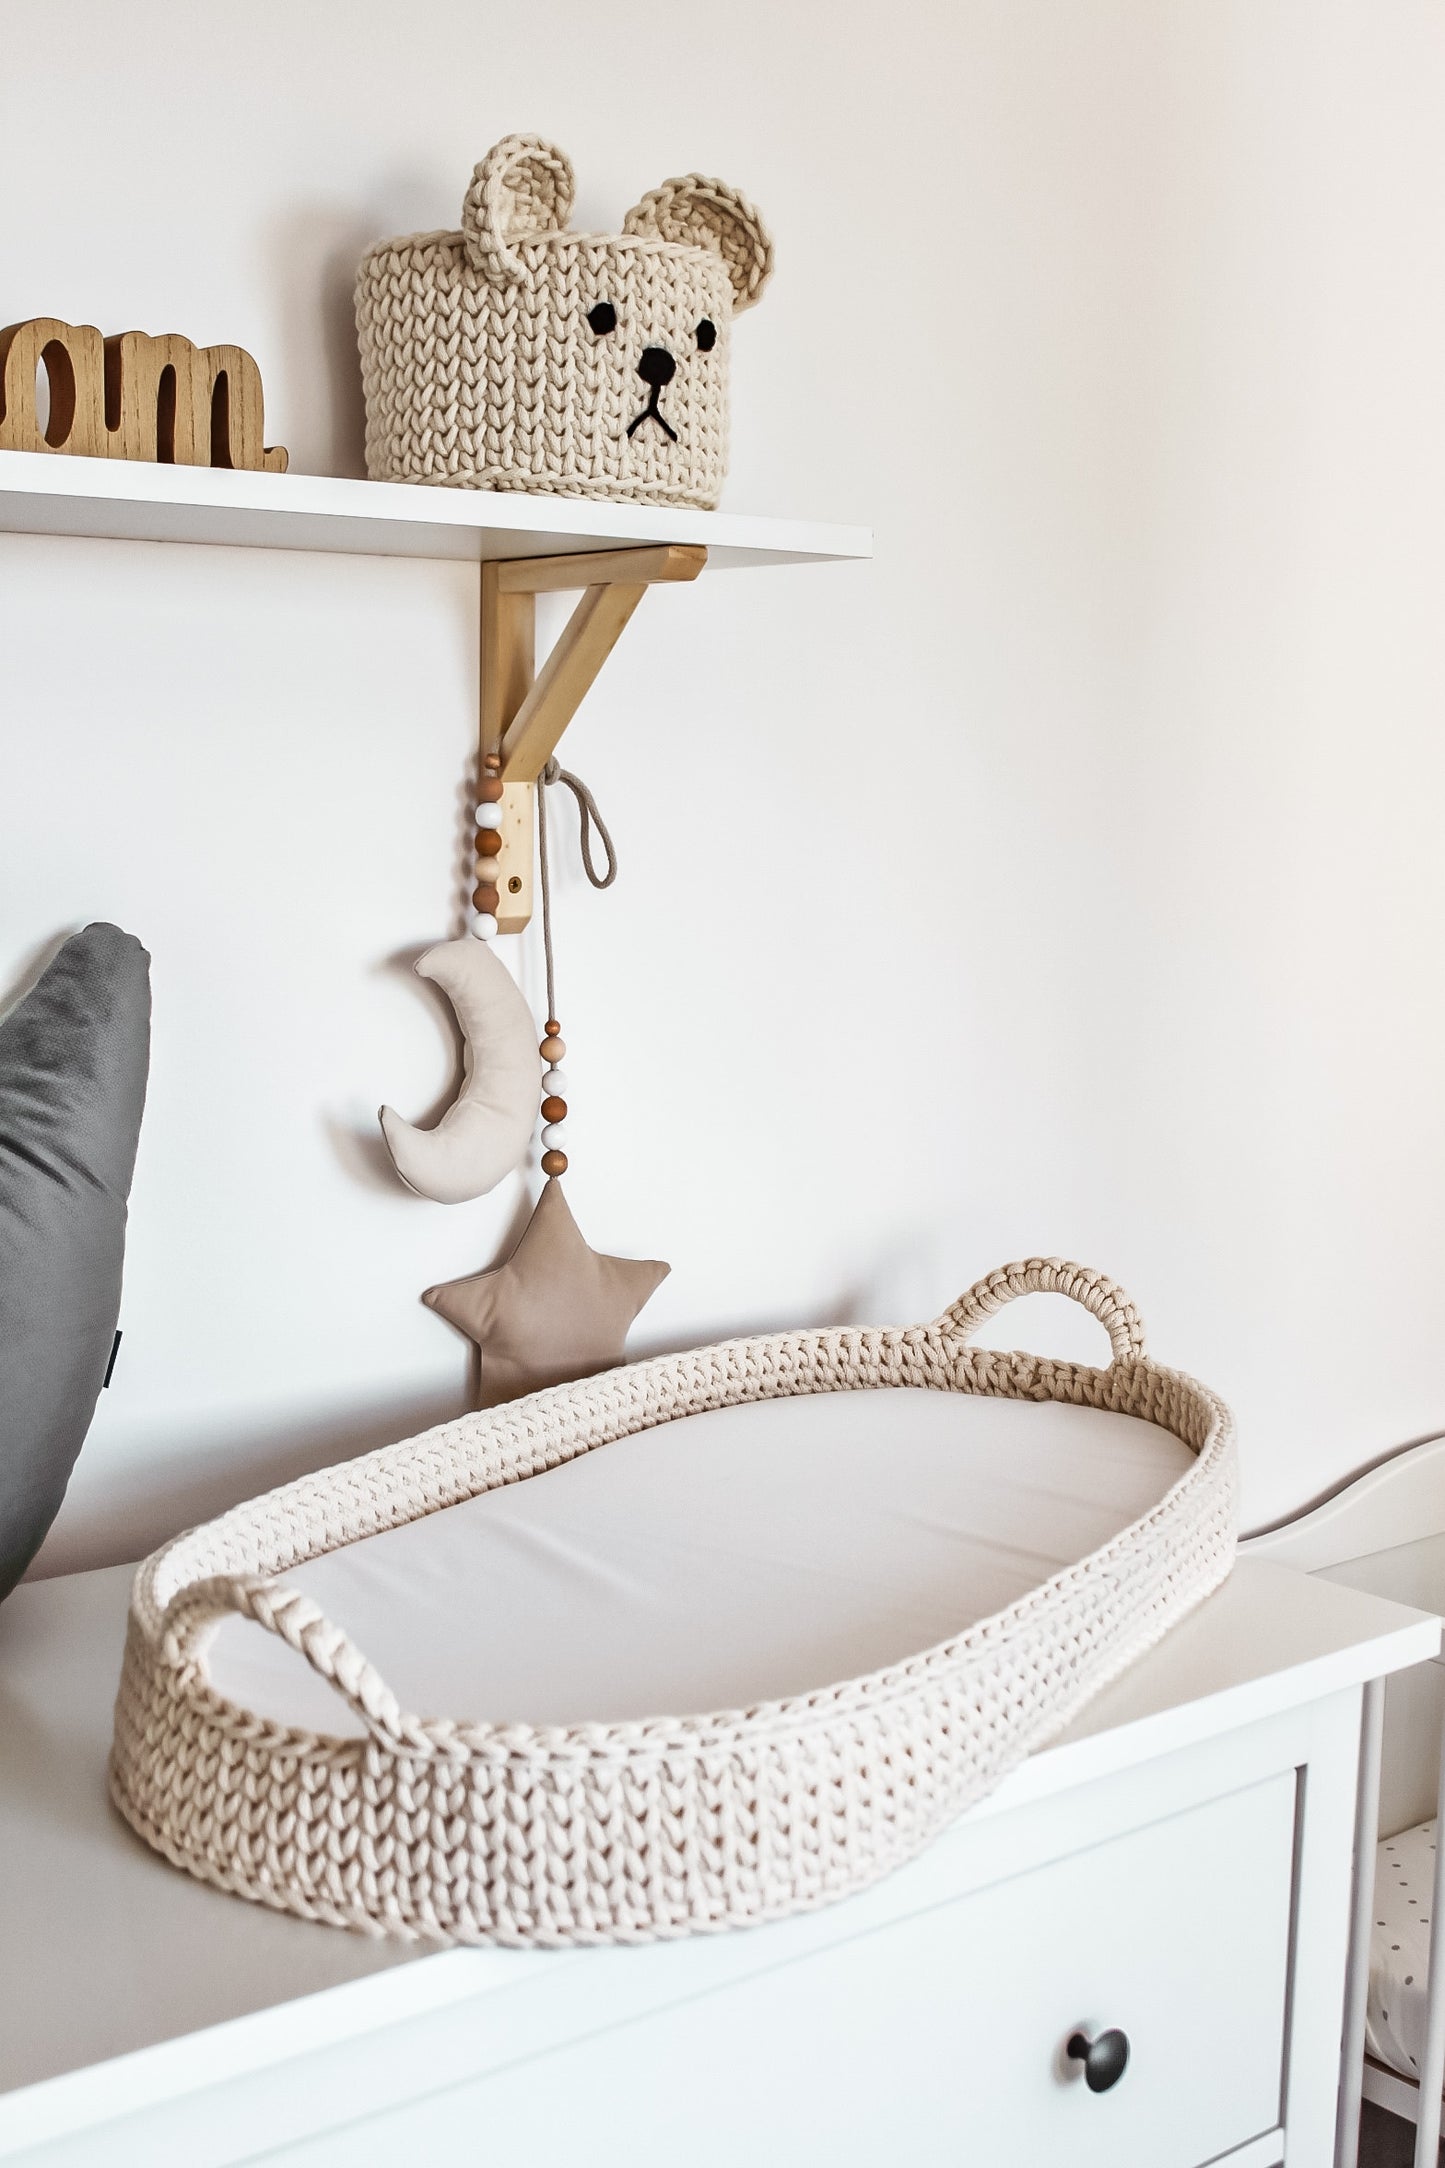 Crochet baby changing basket with mattress